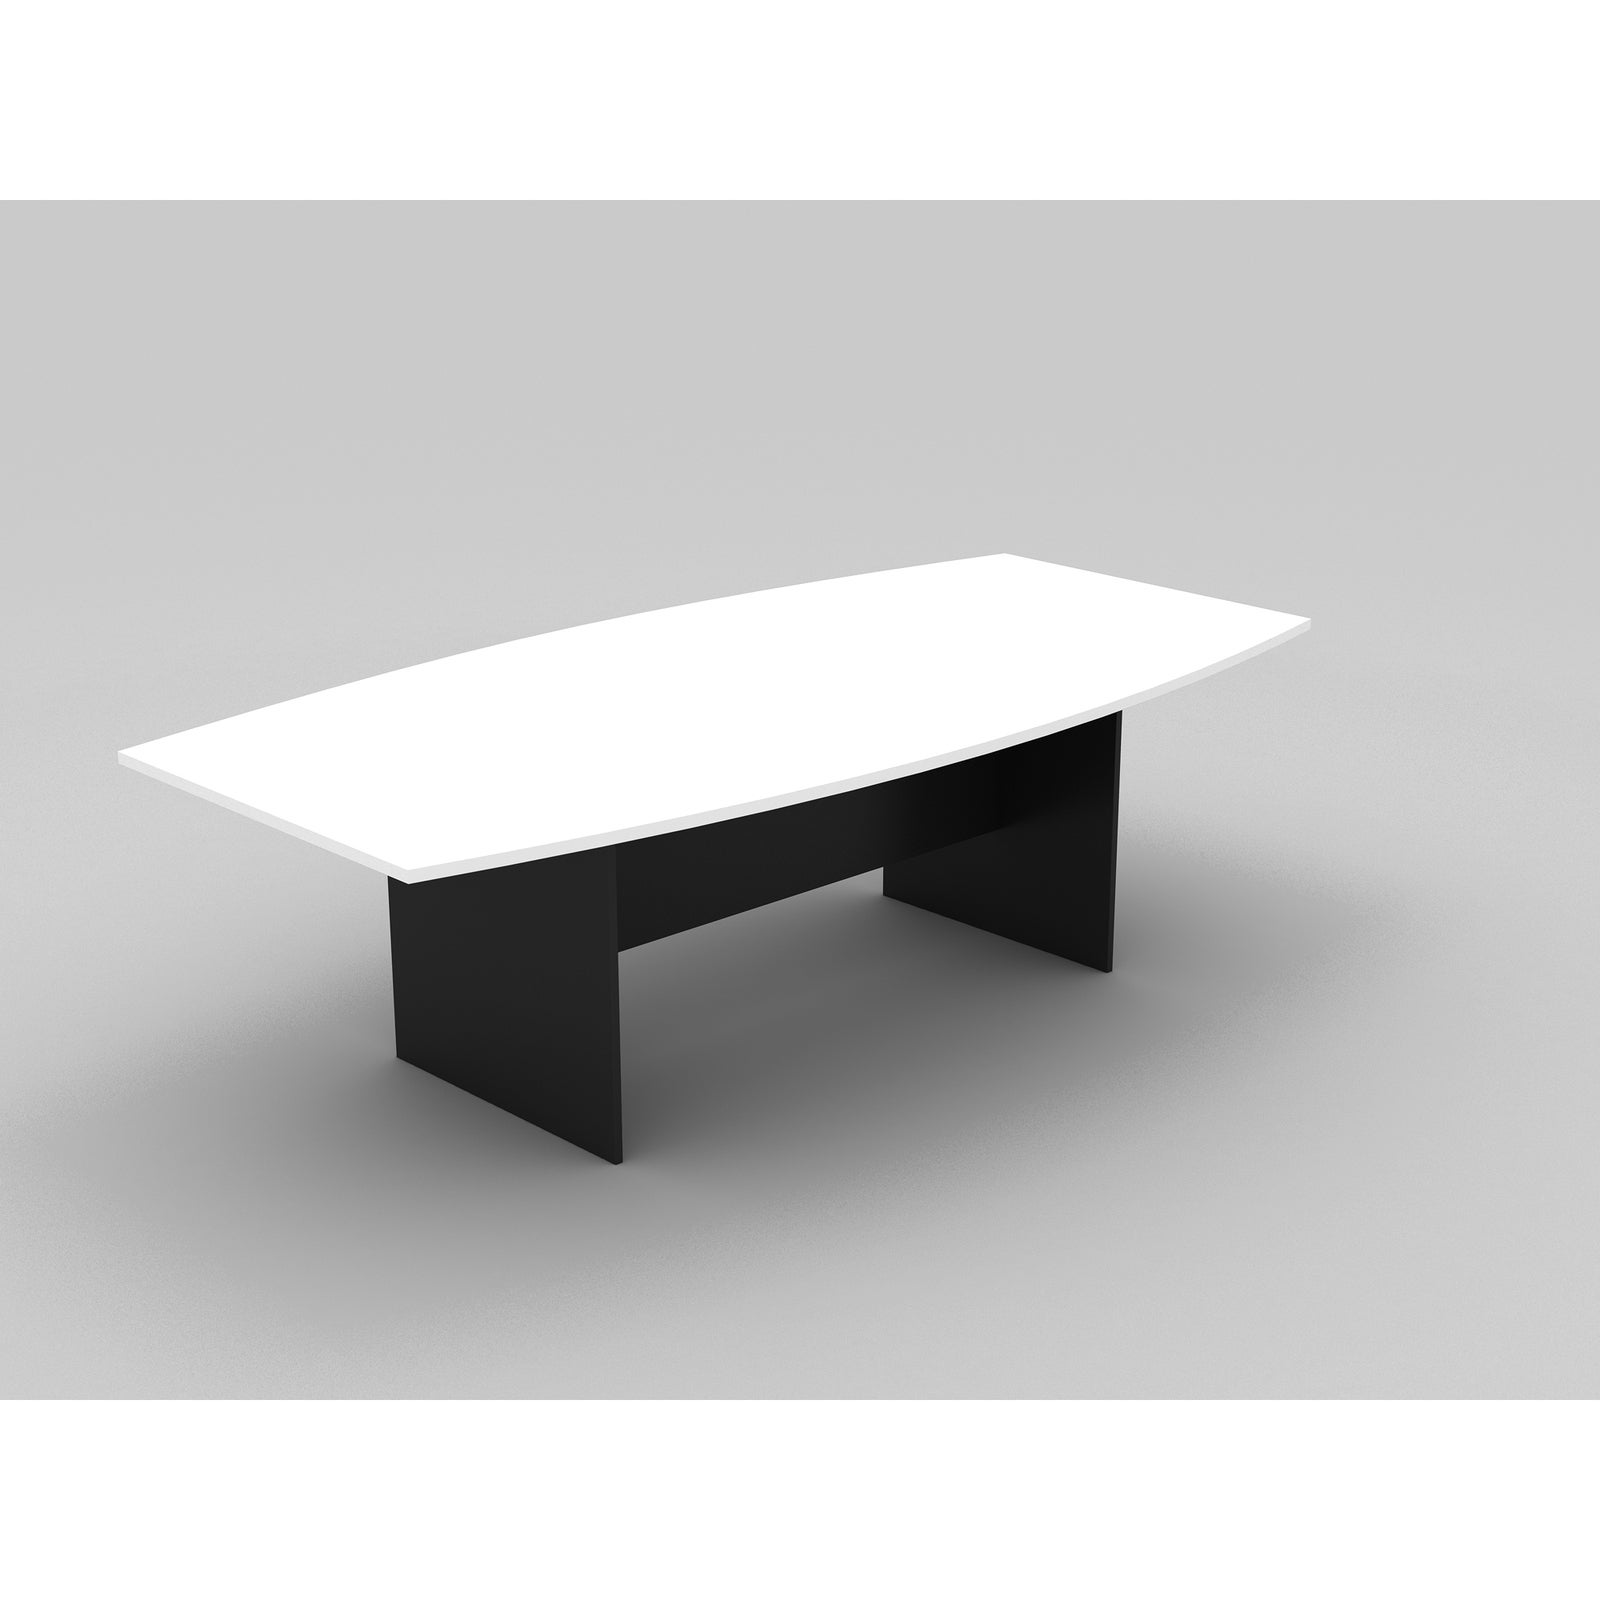 OM BOARDROOM TABLE BASE W2400 x D1200 x H720mm White/ Charcoal